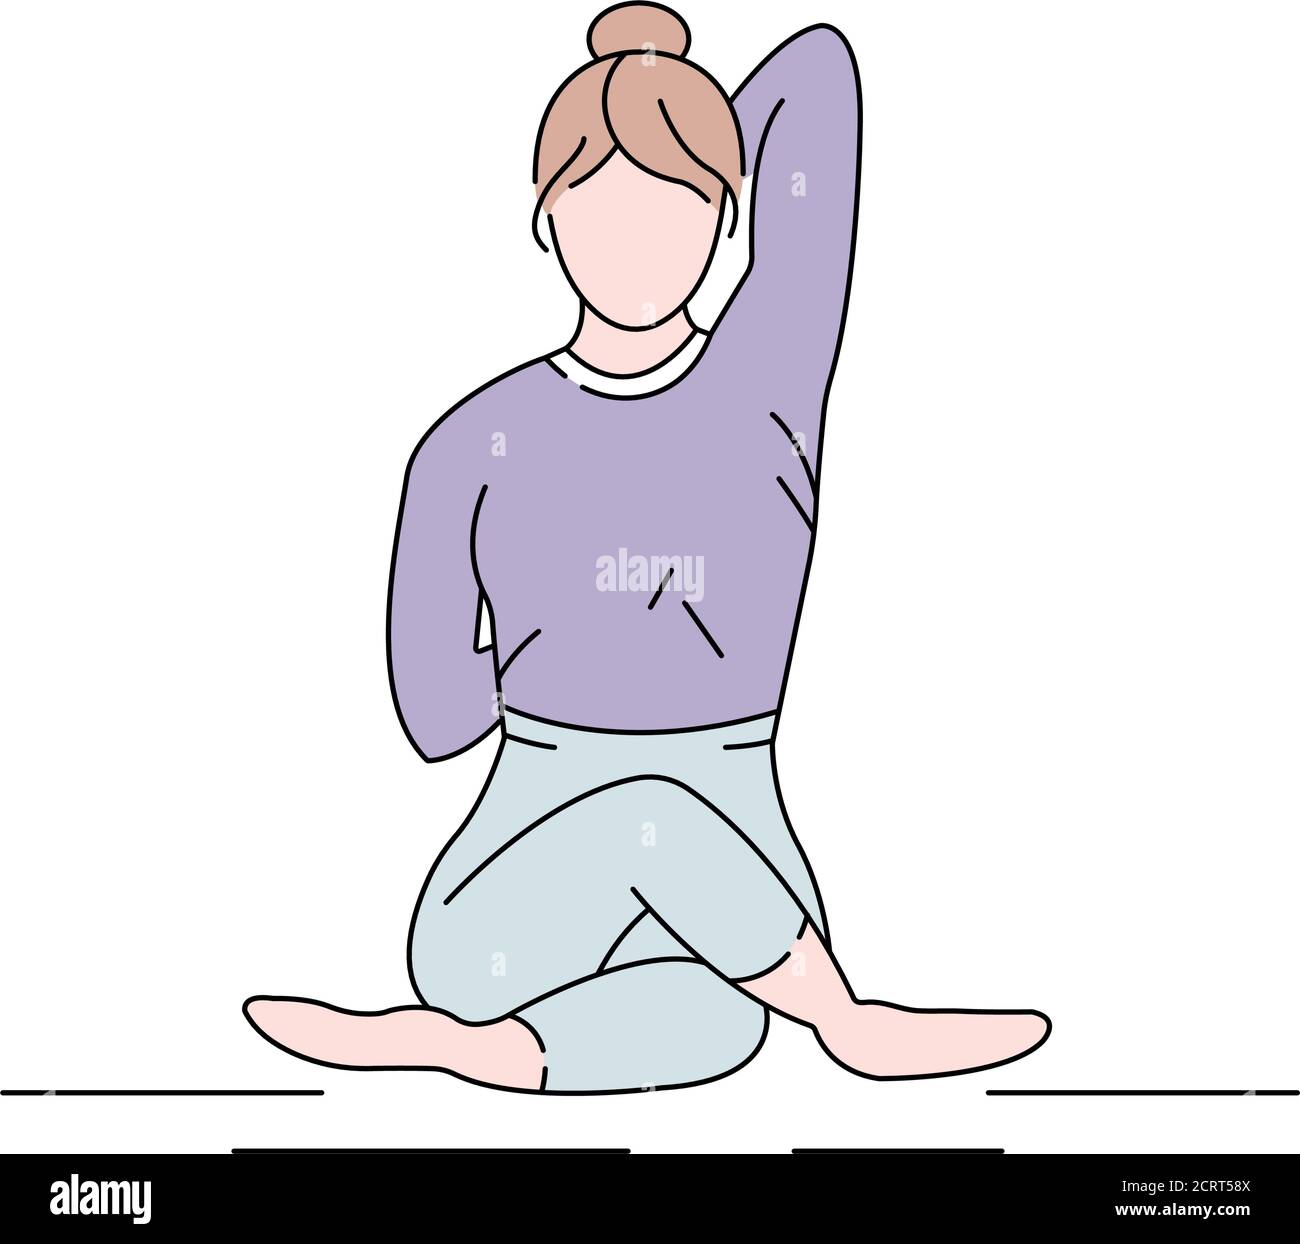 Cow face pose sequence yoga asanas set. Illustration stylized woman  practicing gomukhasana step by step. | CanStock